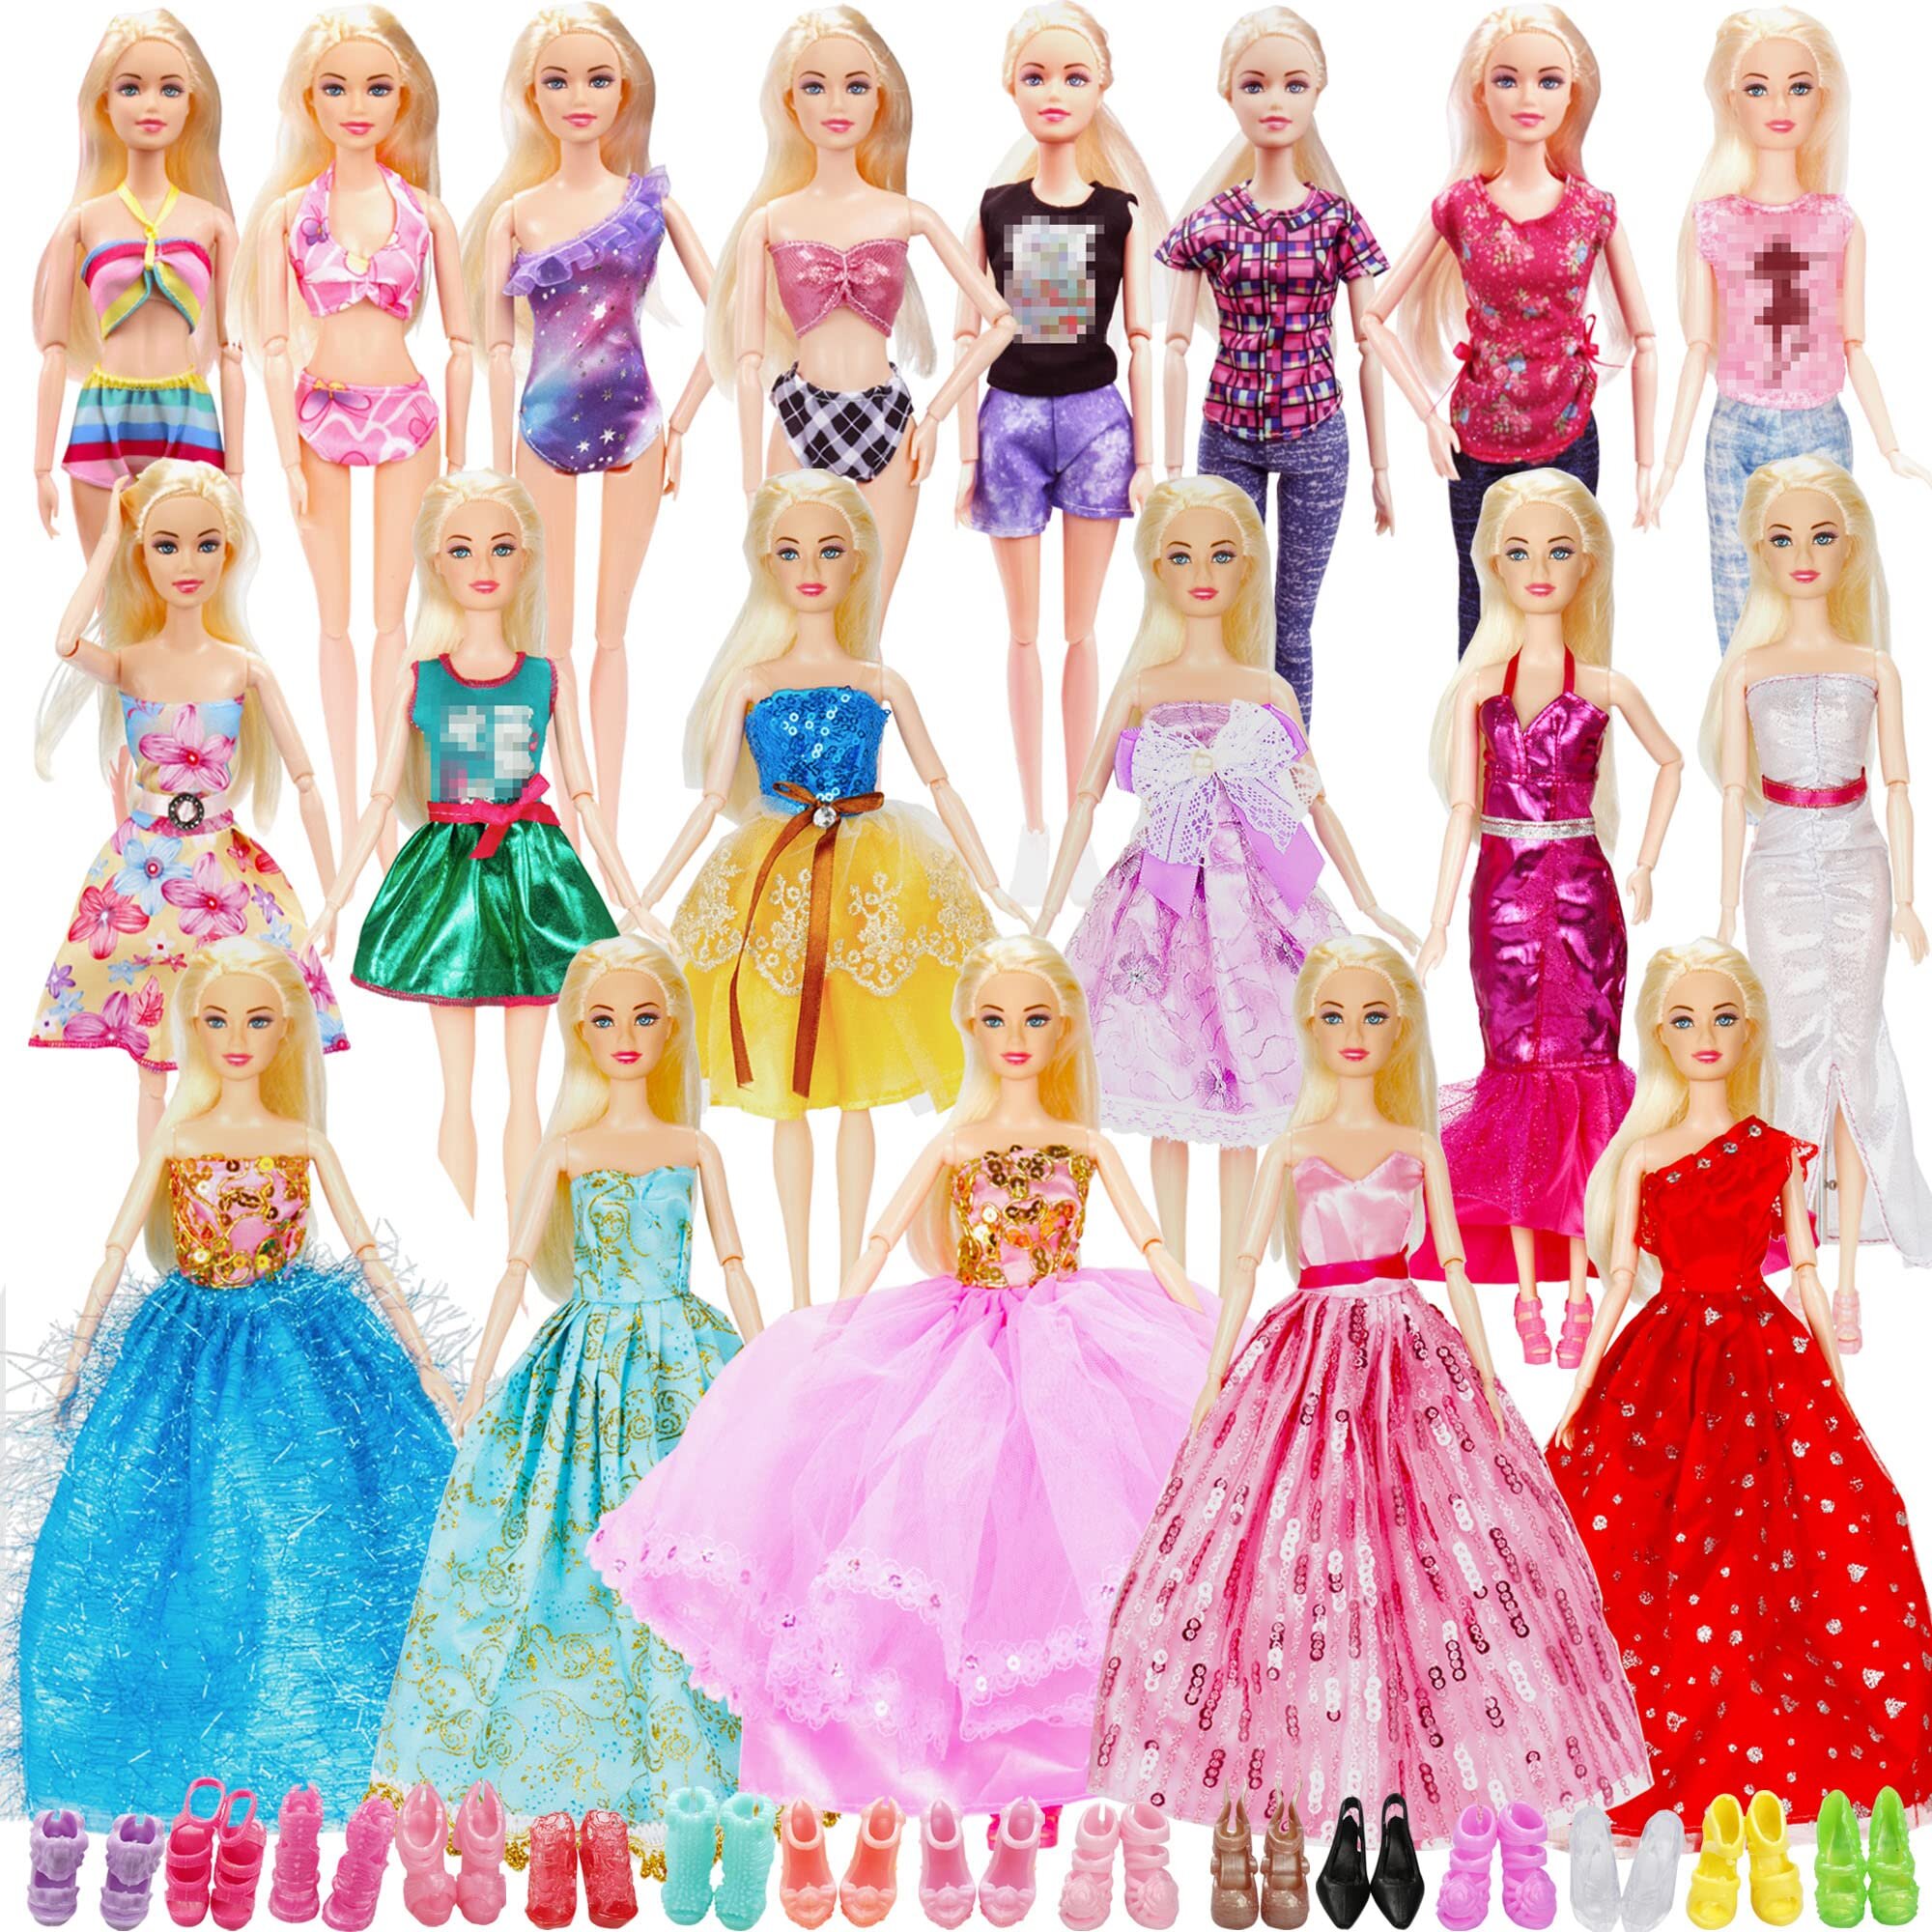 36 Pack Doll clothes and Accessories - 1 Princess Dress 5 Fashion Dress cloth 3 Top and Pants 3 Bikini Swimsuits 10 Shoes 14 Other Doll Accessories Si